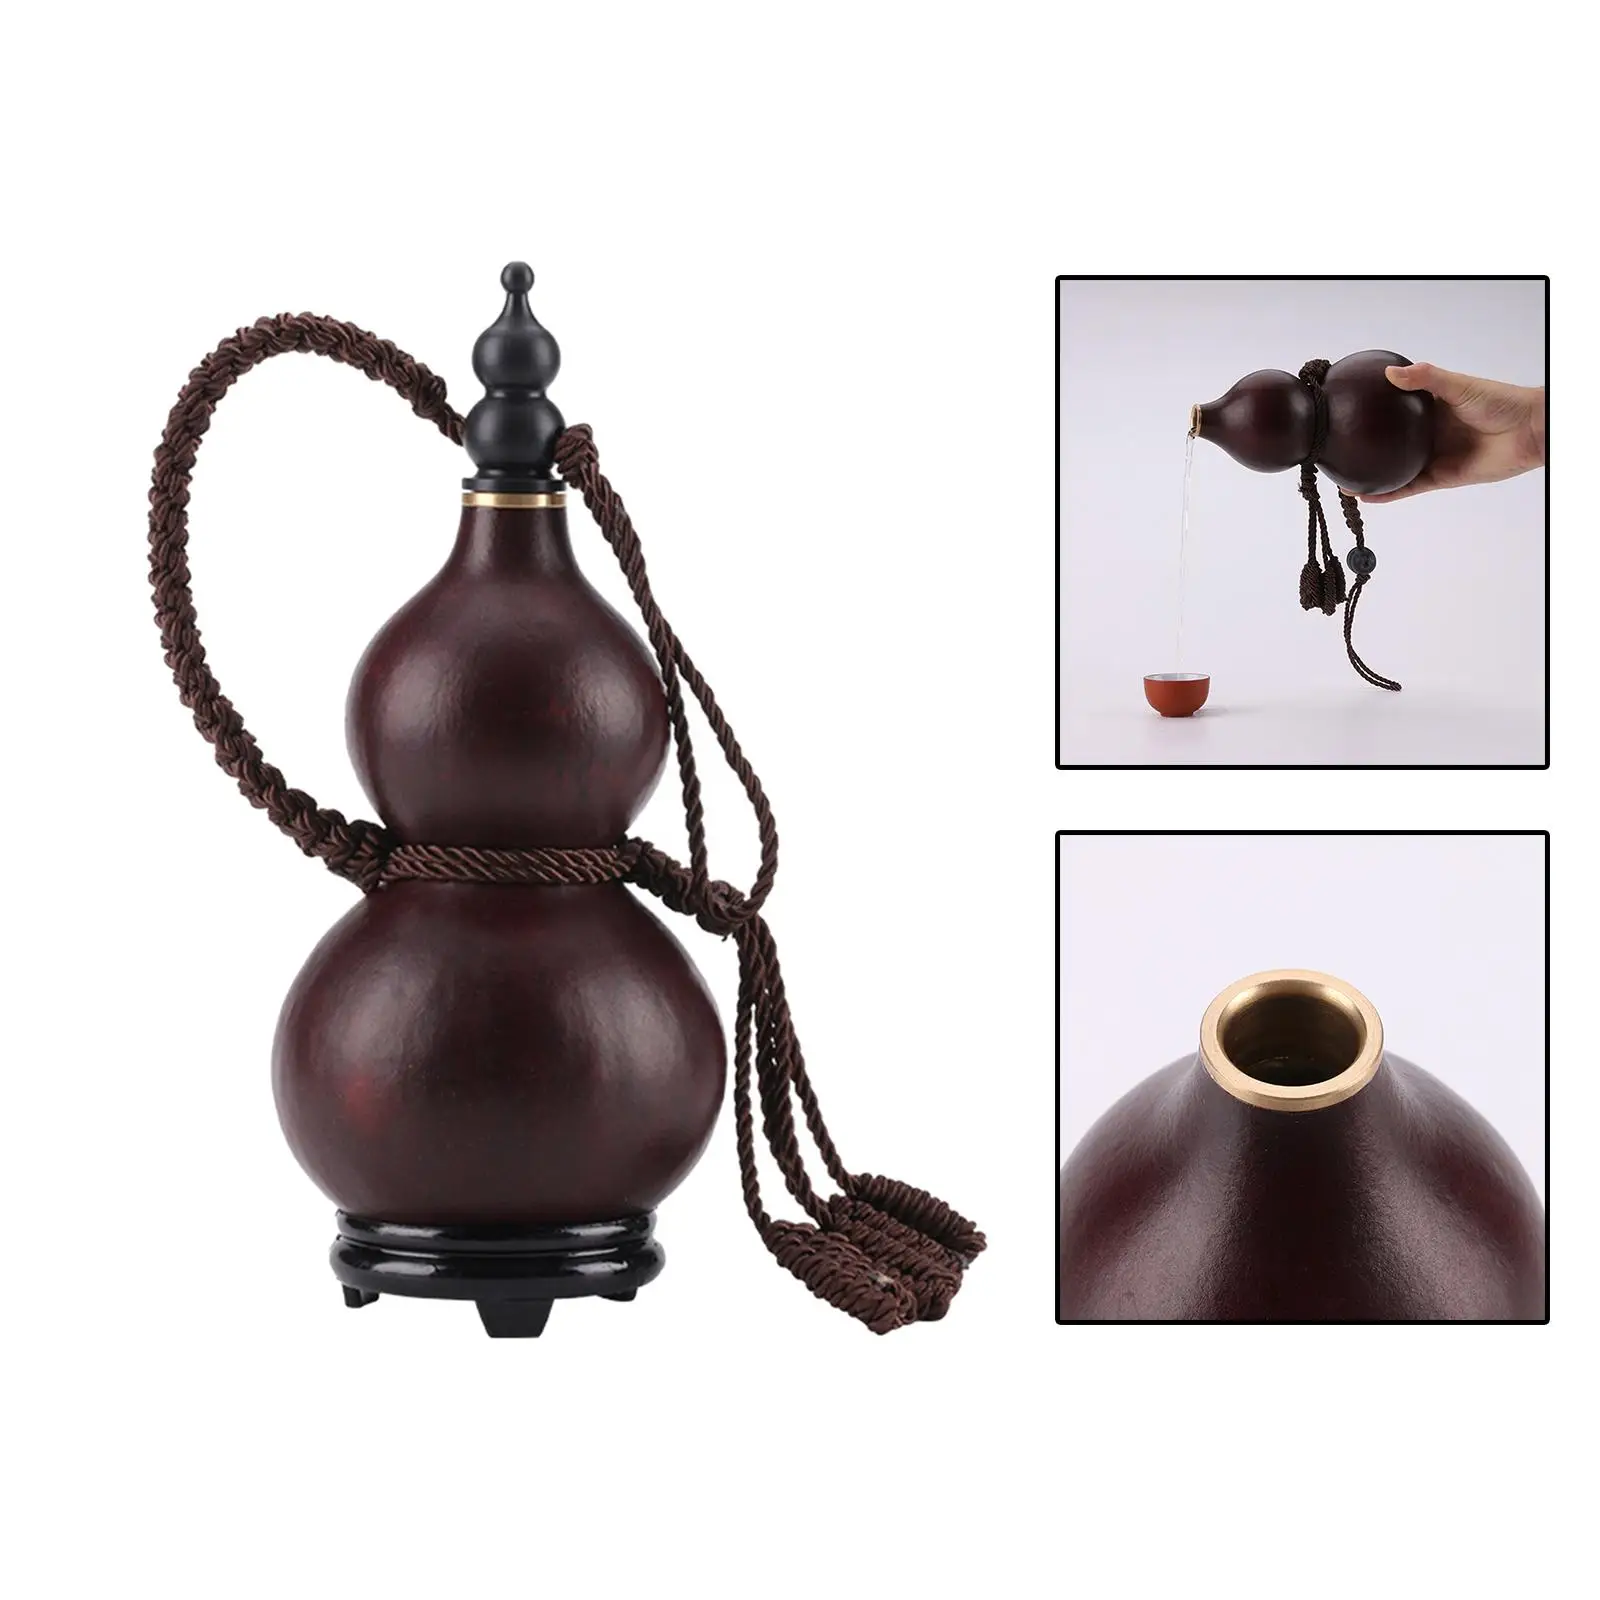 Gourd Water Bottle with Lid Hollow Calabash Dried Gourd Drinking Bottle for Indoor Camping Drinks Holder Decoration